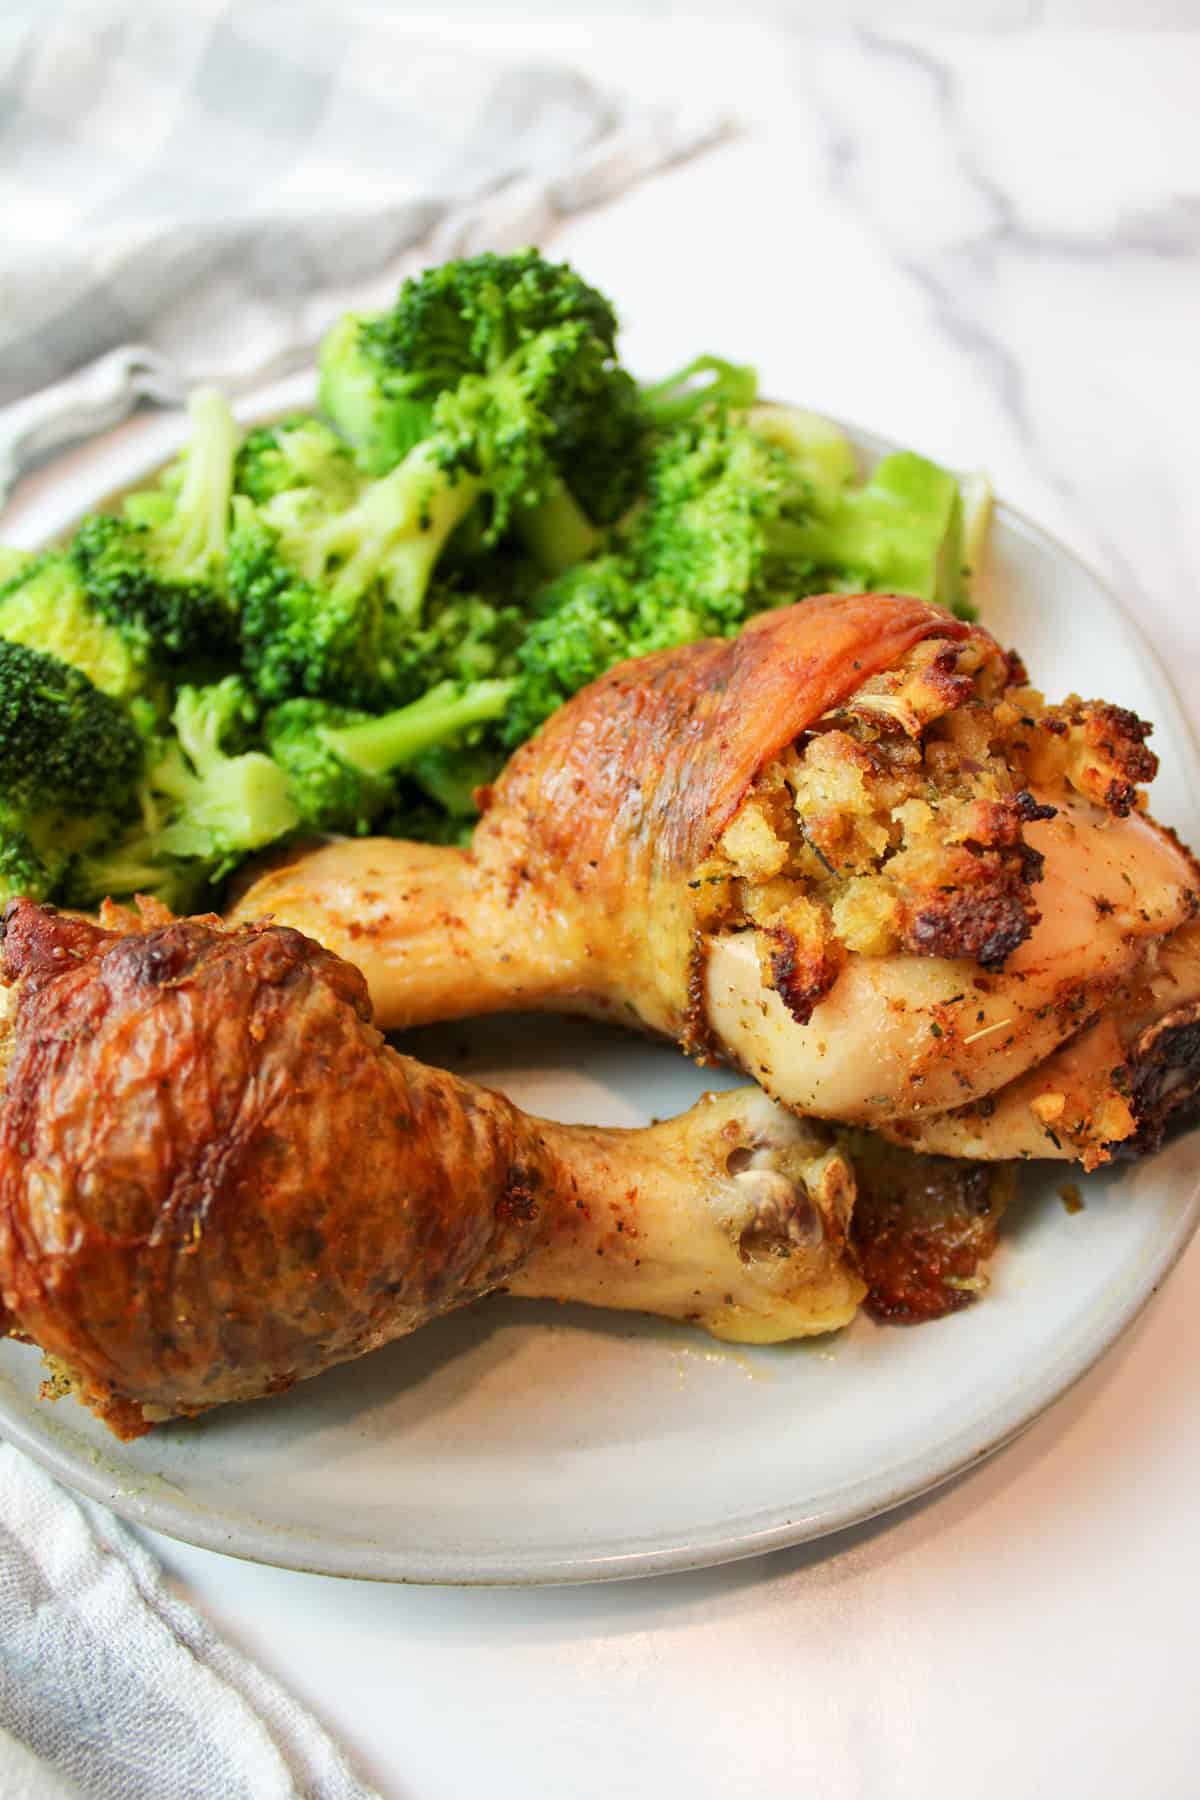 stuffed chicken legs on a plate with steamed broccoli